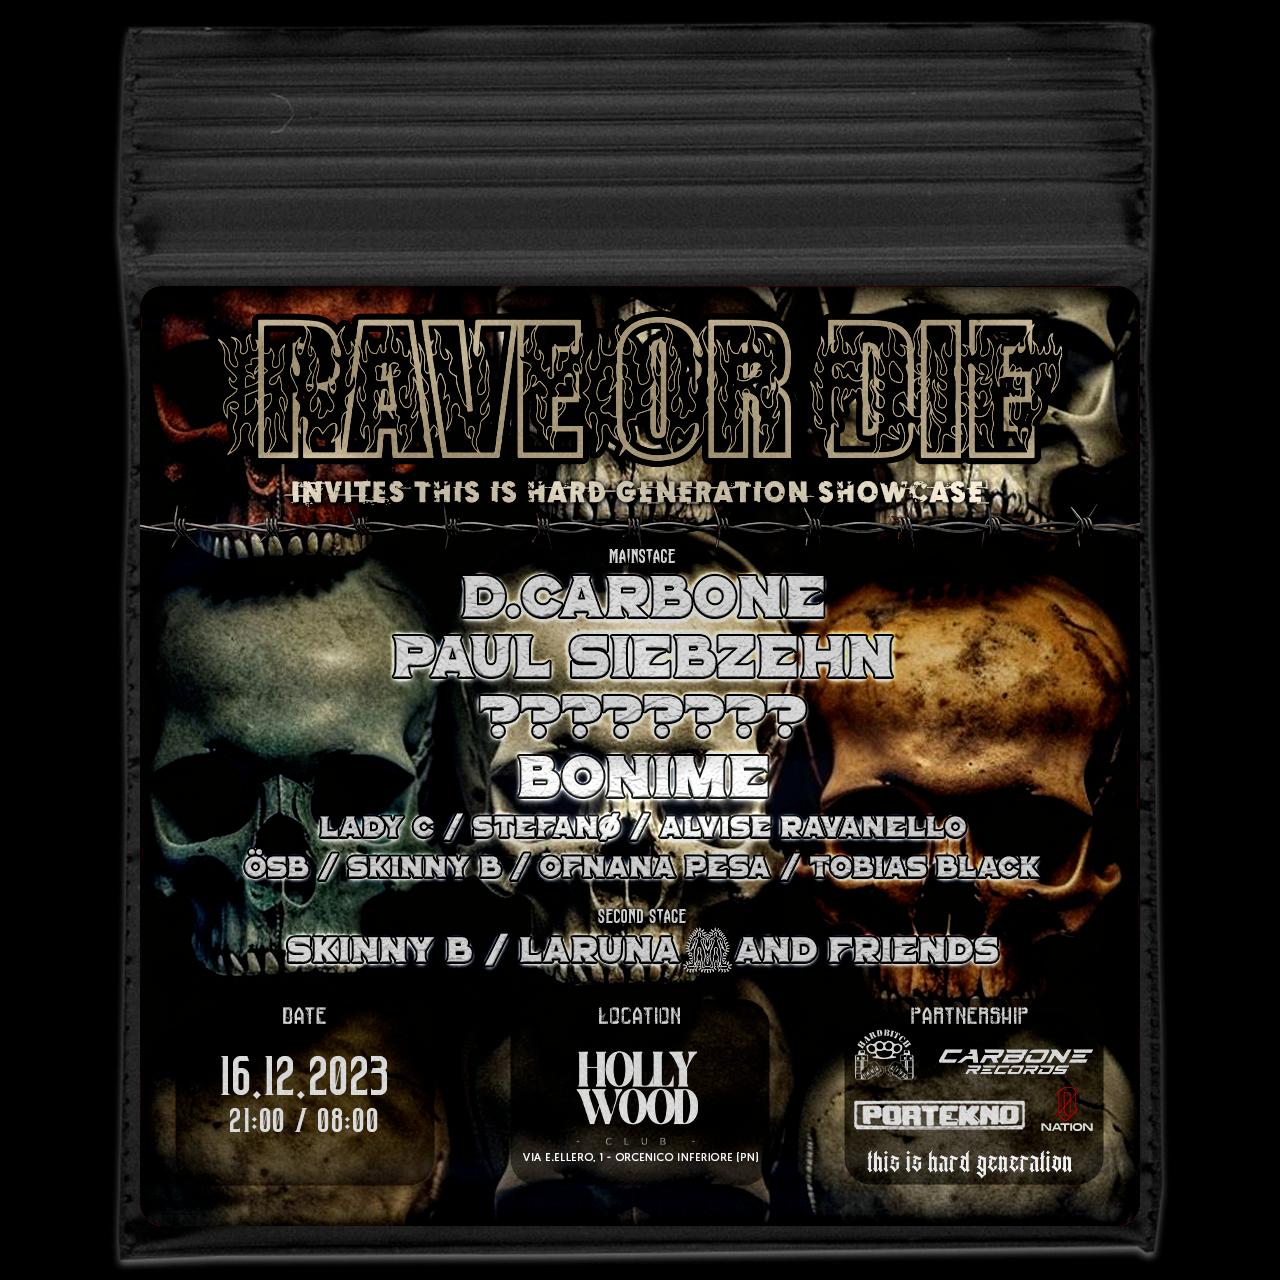 RAVE OR DIE X T.I.H.G. RECORDS SHOW CASE - Página frontal